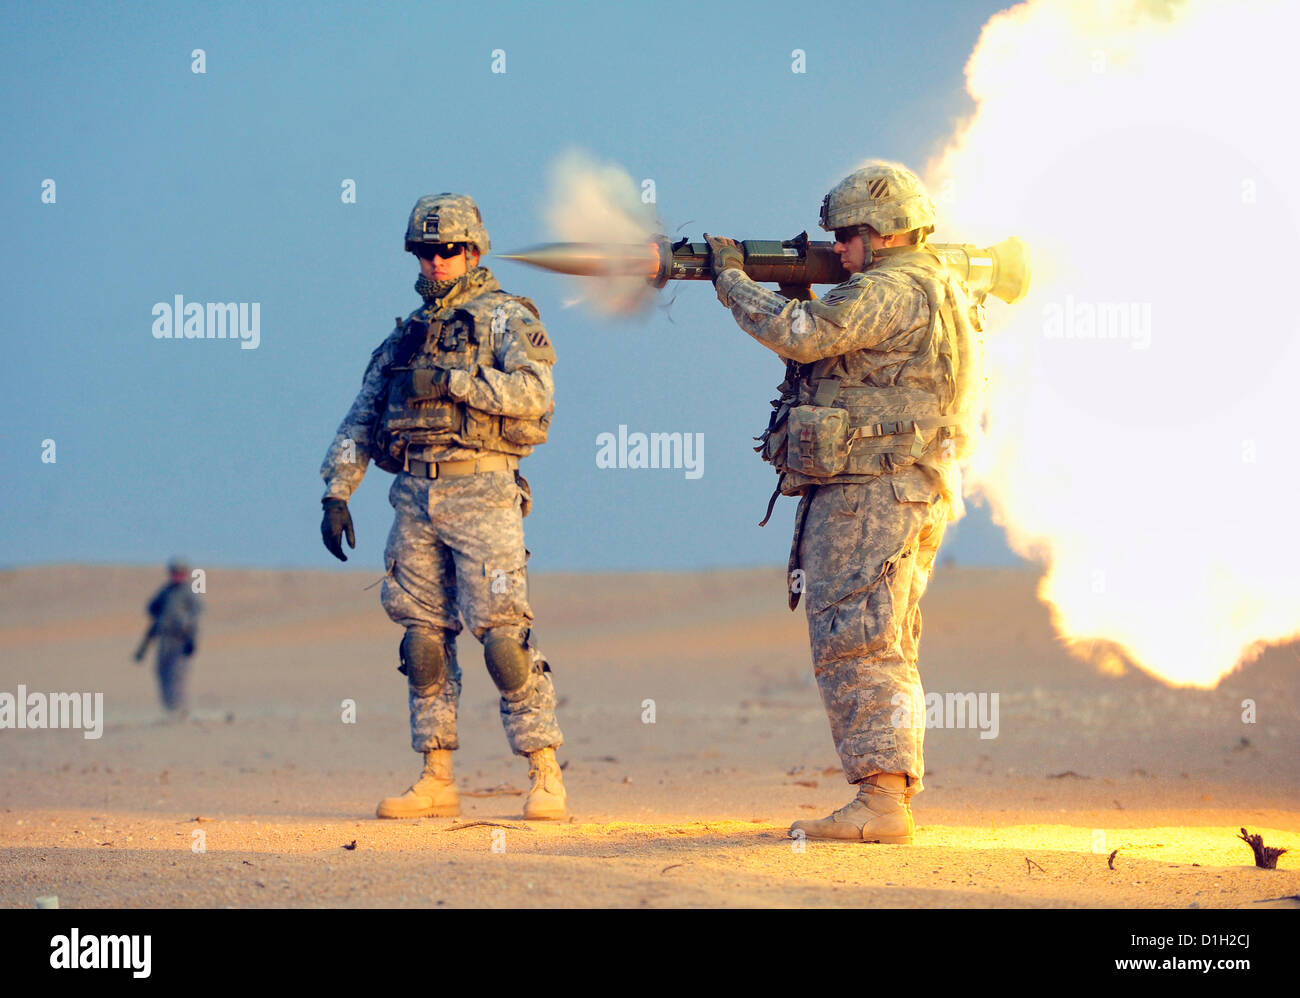 A US Army soldier fires an AT-4 anti-tank weapon during training at the Udairi Range Complex December 20, 2012 near Camp Buehring, Kuwait. The AT-4 is a portable, single-shot recoilless smoothbore weapon used to destroy heavily armored vehicles. Stock Photo